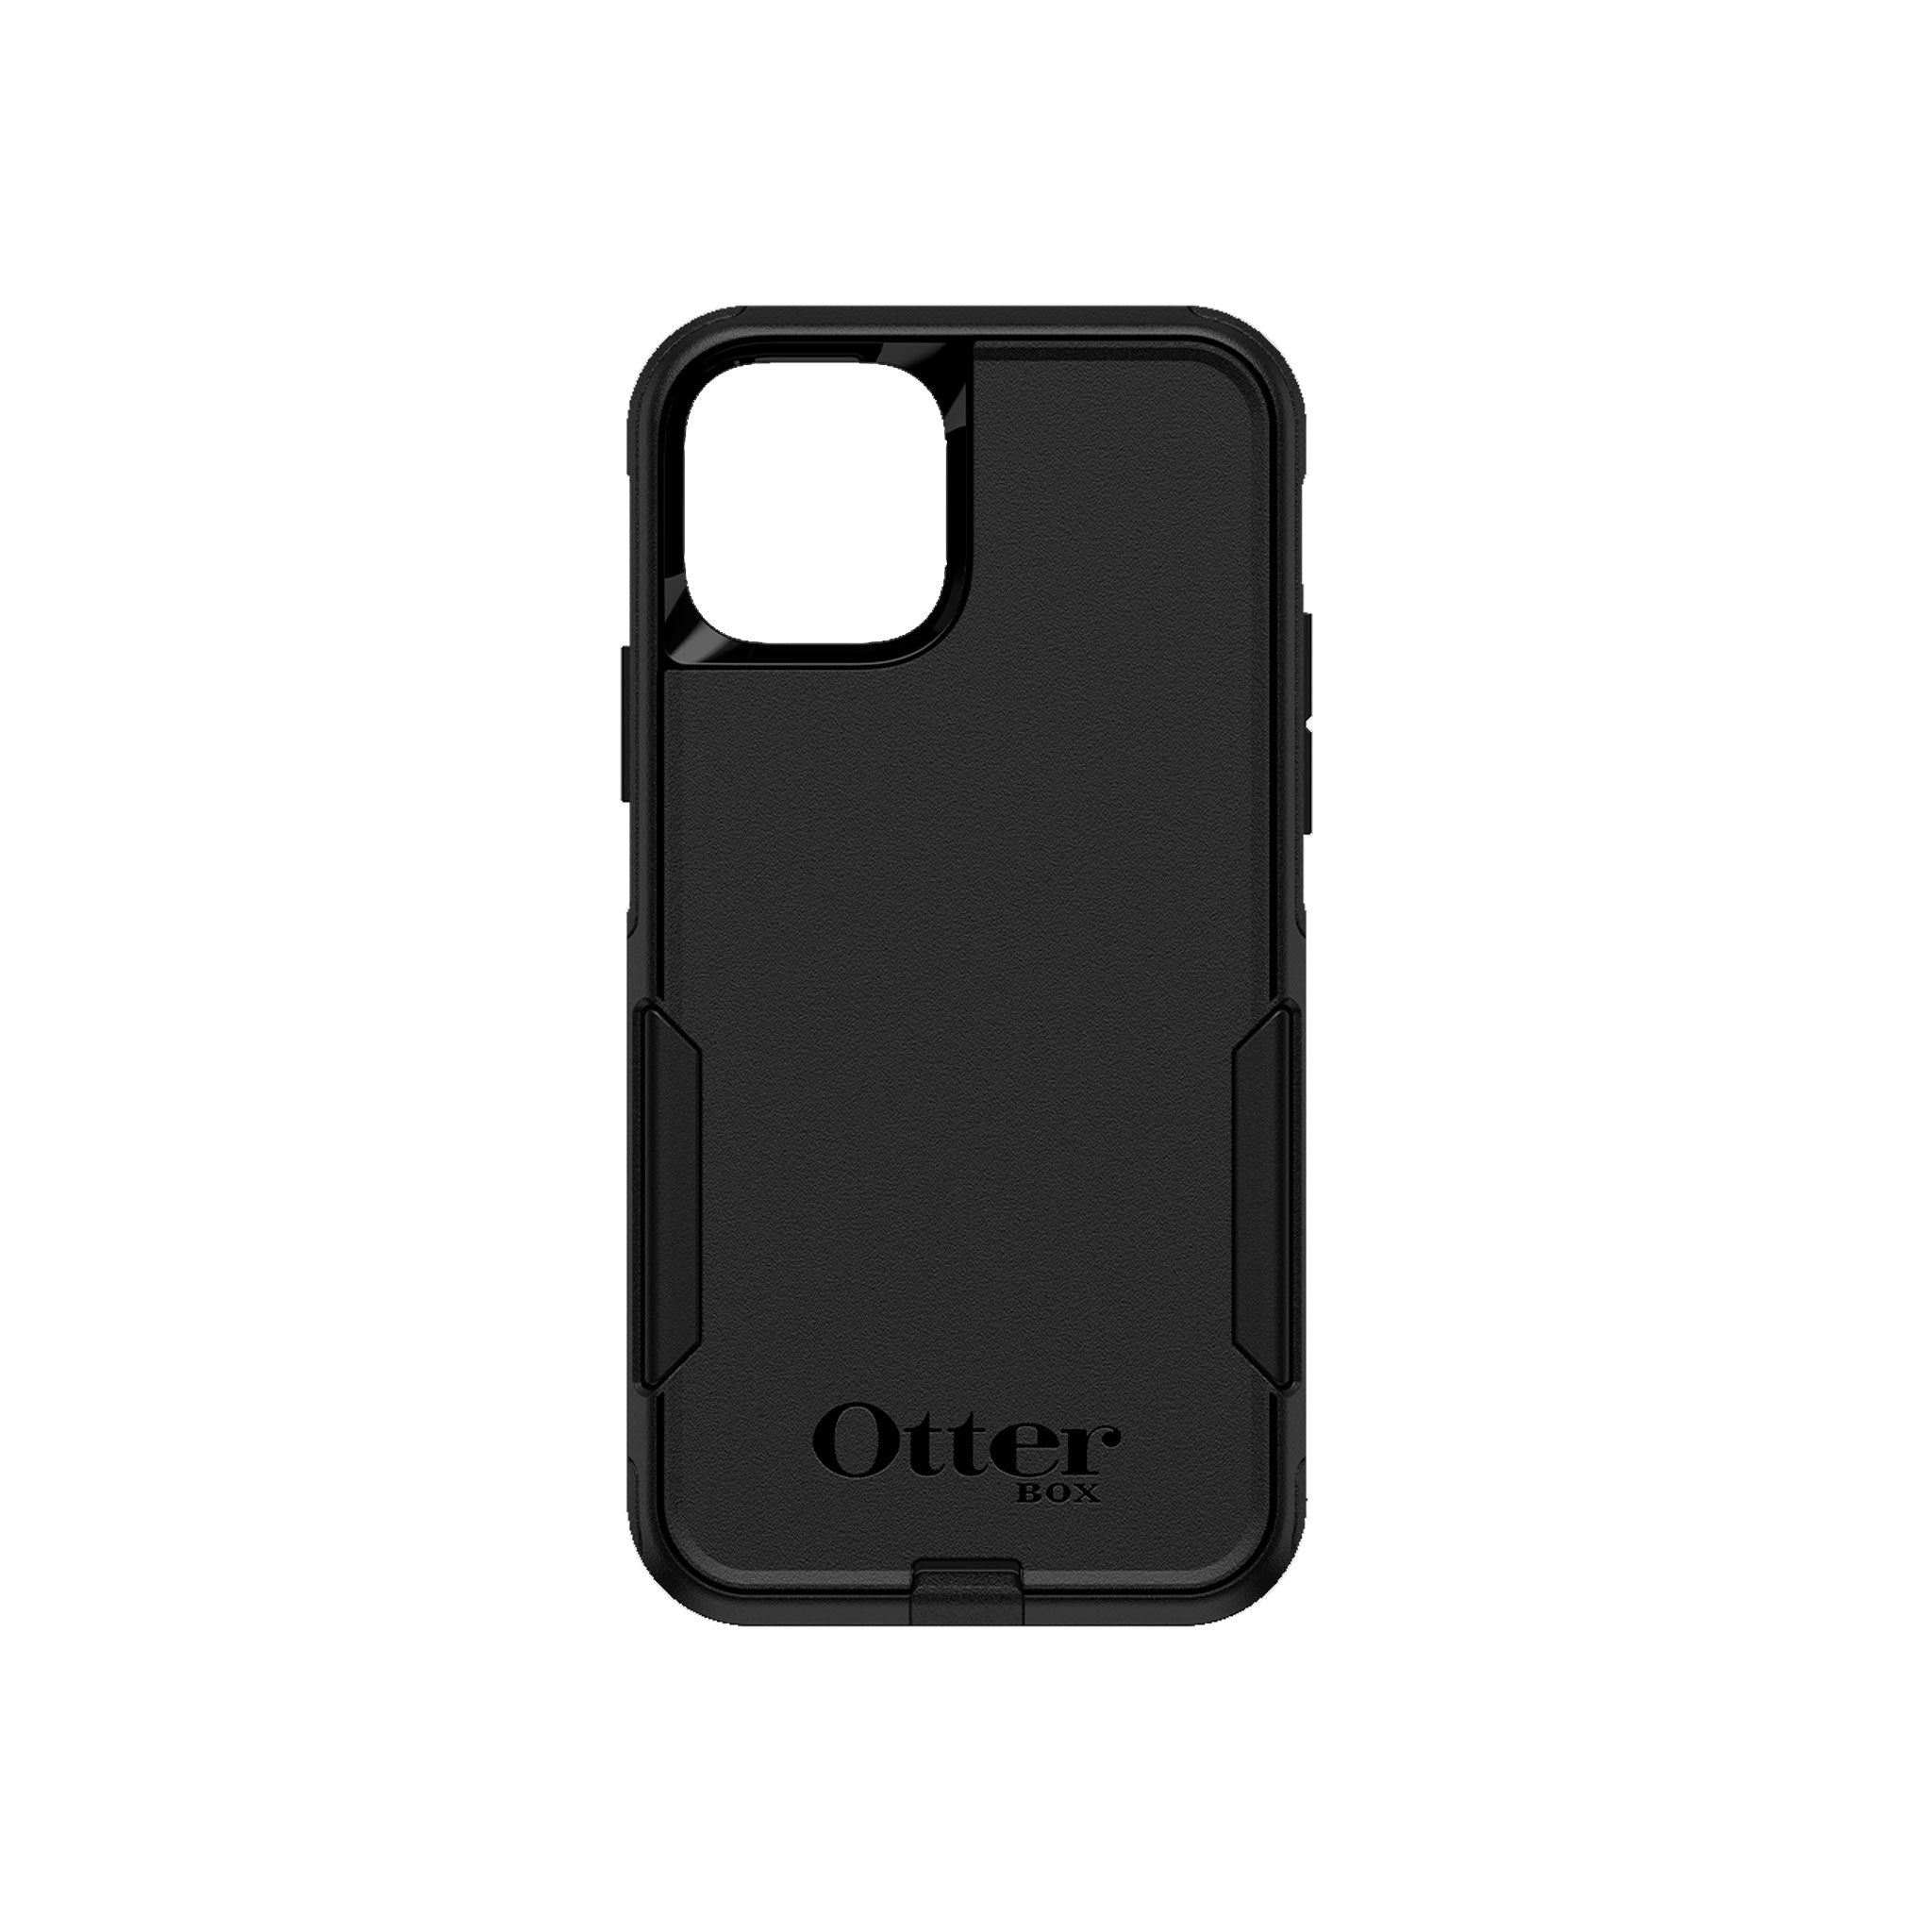 OtterBox - Commuter for iPhone 11 Pro - Black